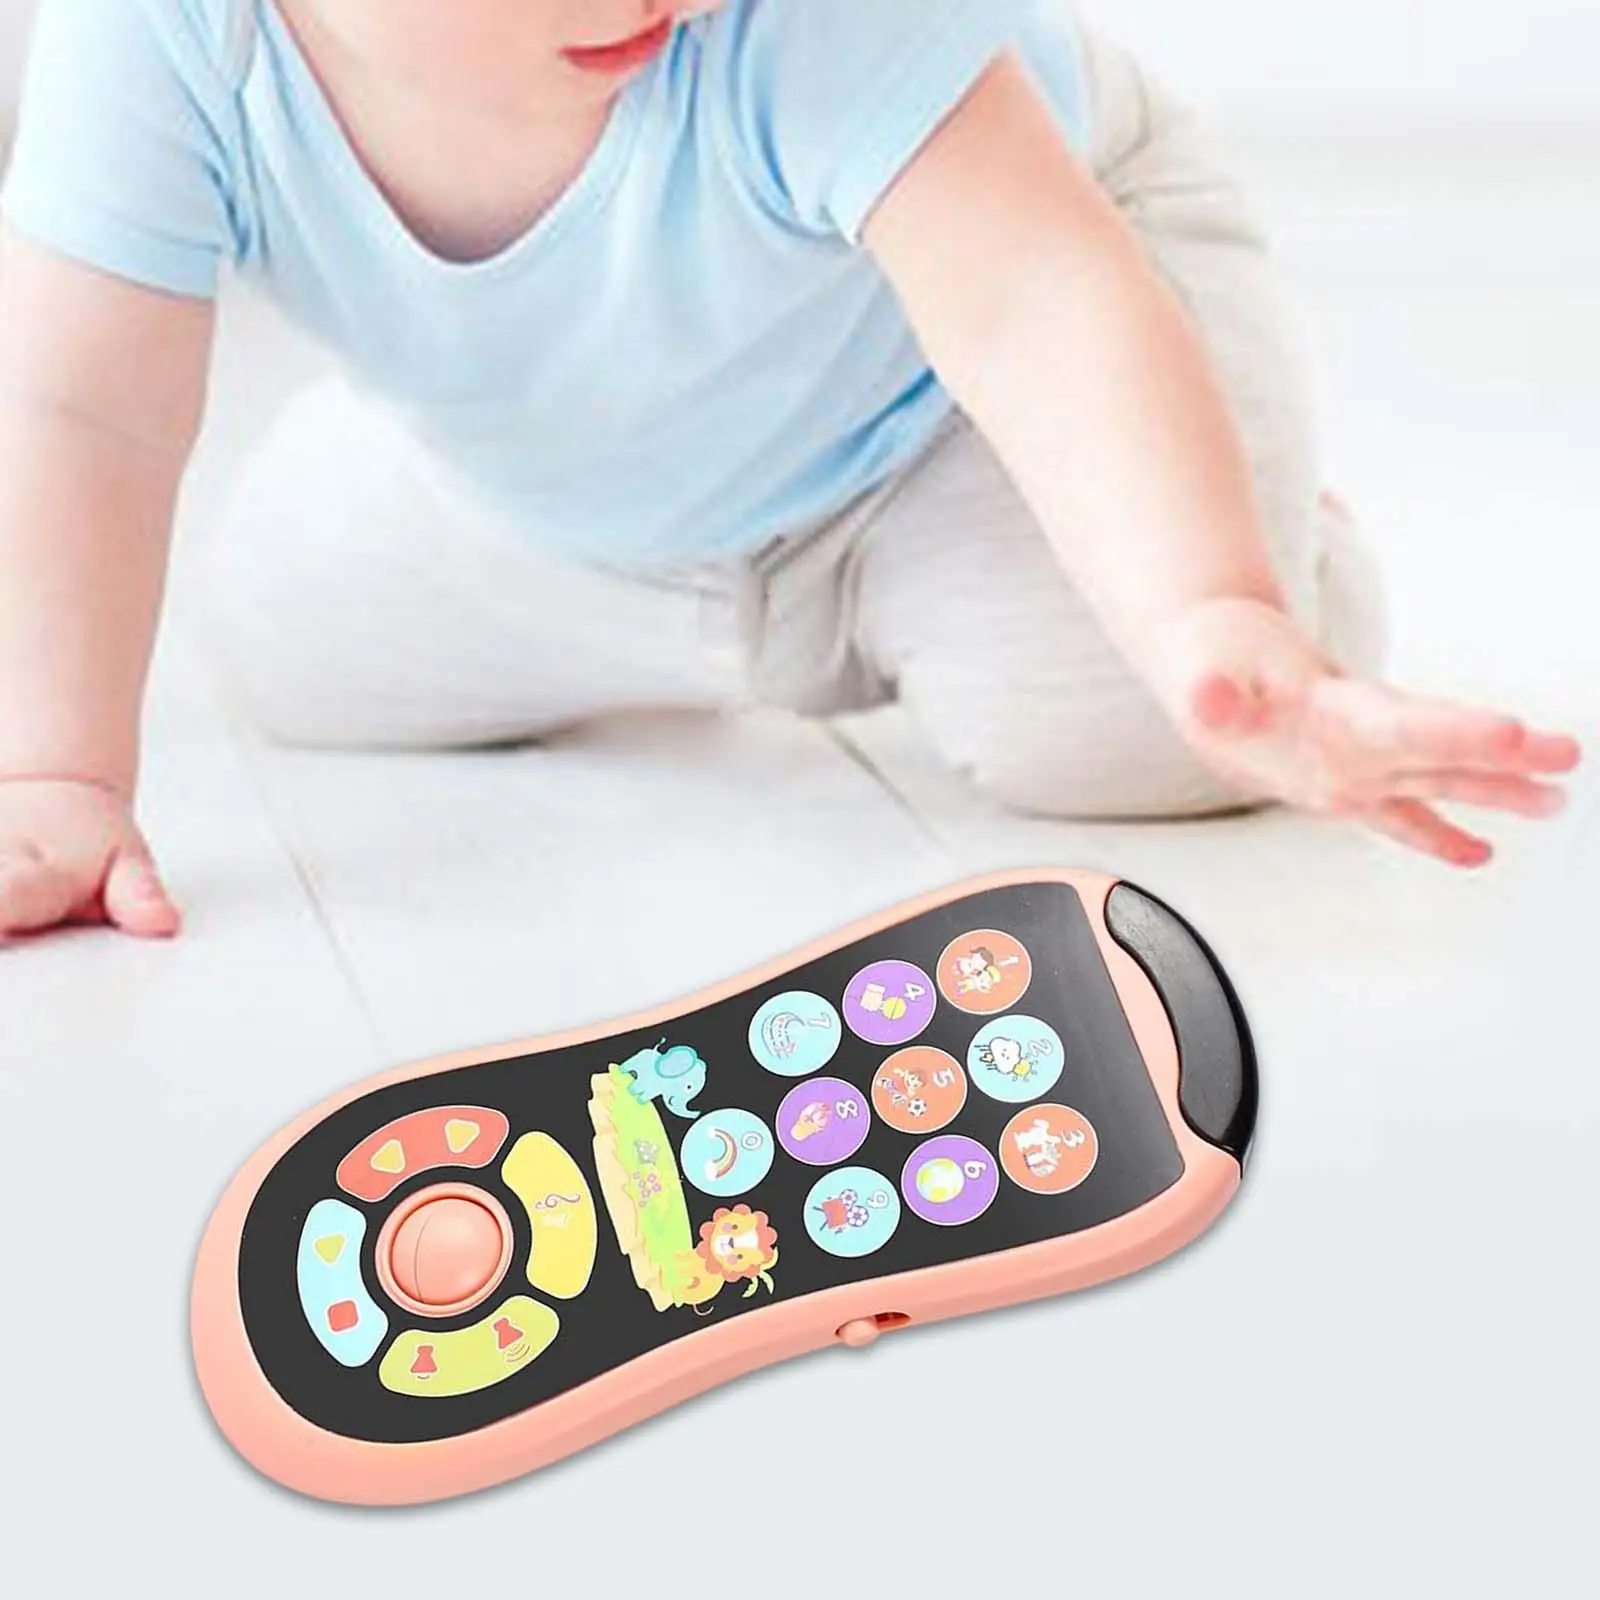 Portable Mini Phone Toys Early Learning Educational Toy with Lights and Music for Toddlers Girls Preschool Boy Birthday Gift